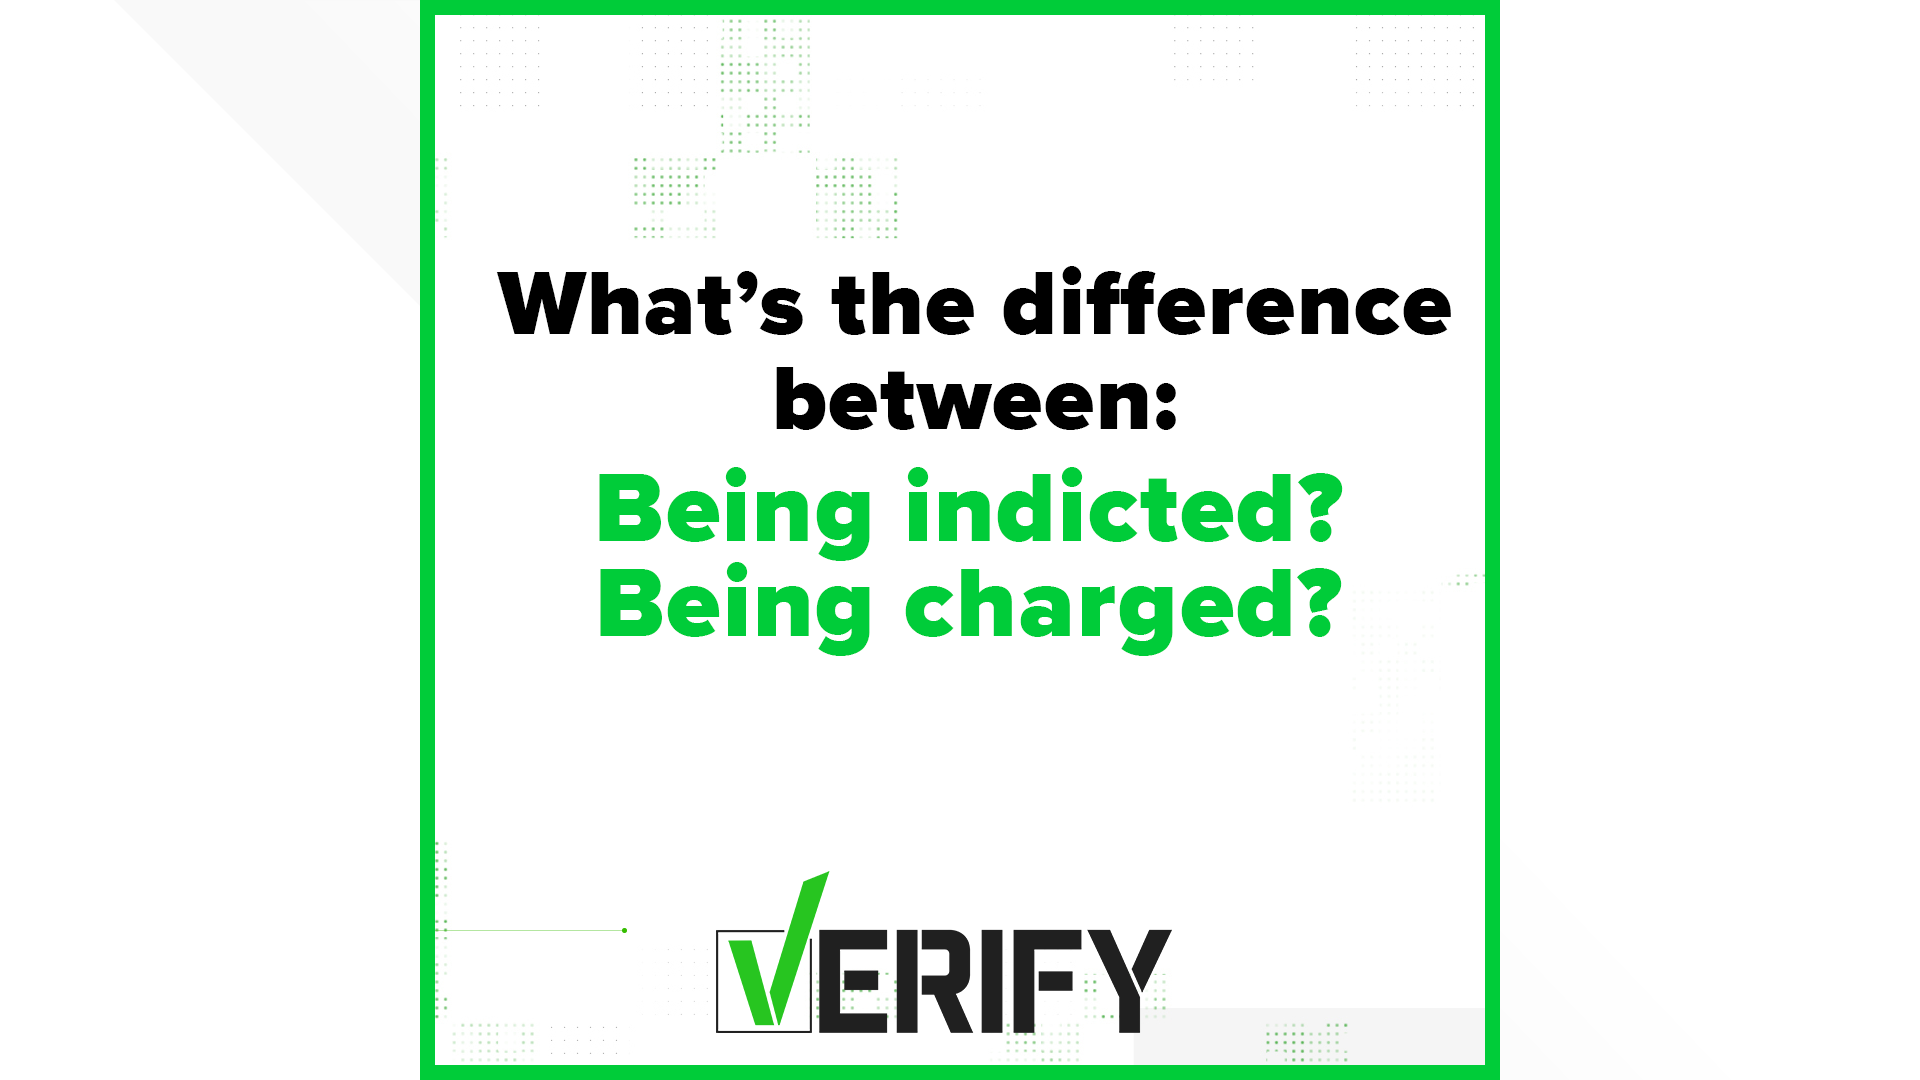 As more and more high-profile cases are announced, it's important to know the difference in their results. Our Verify team is here to clarify.